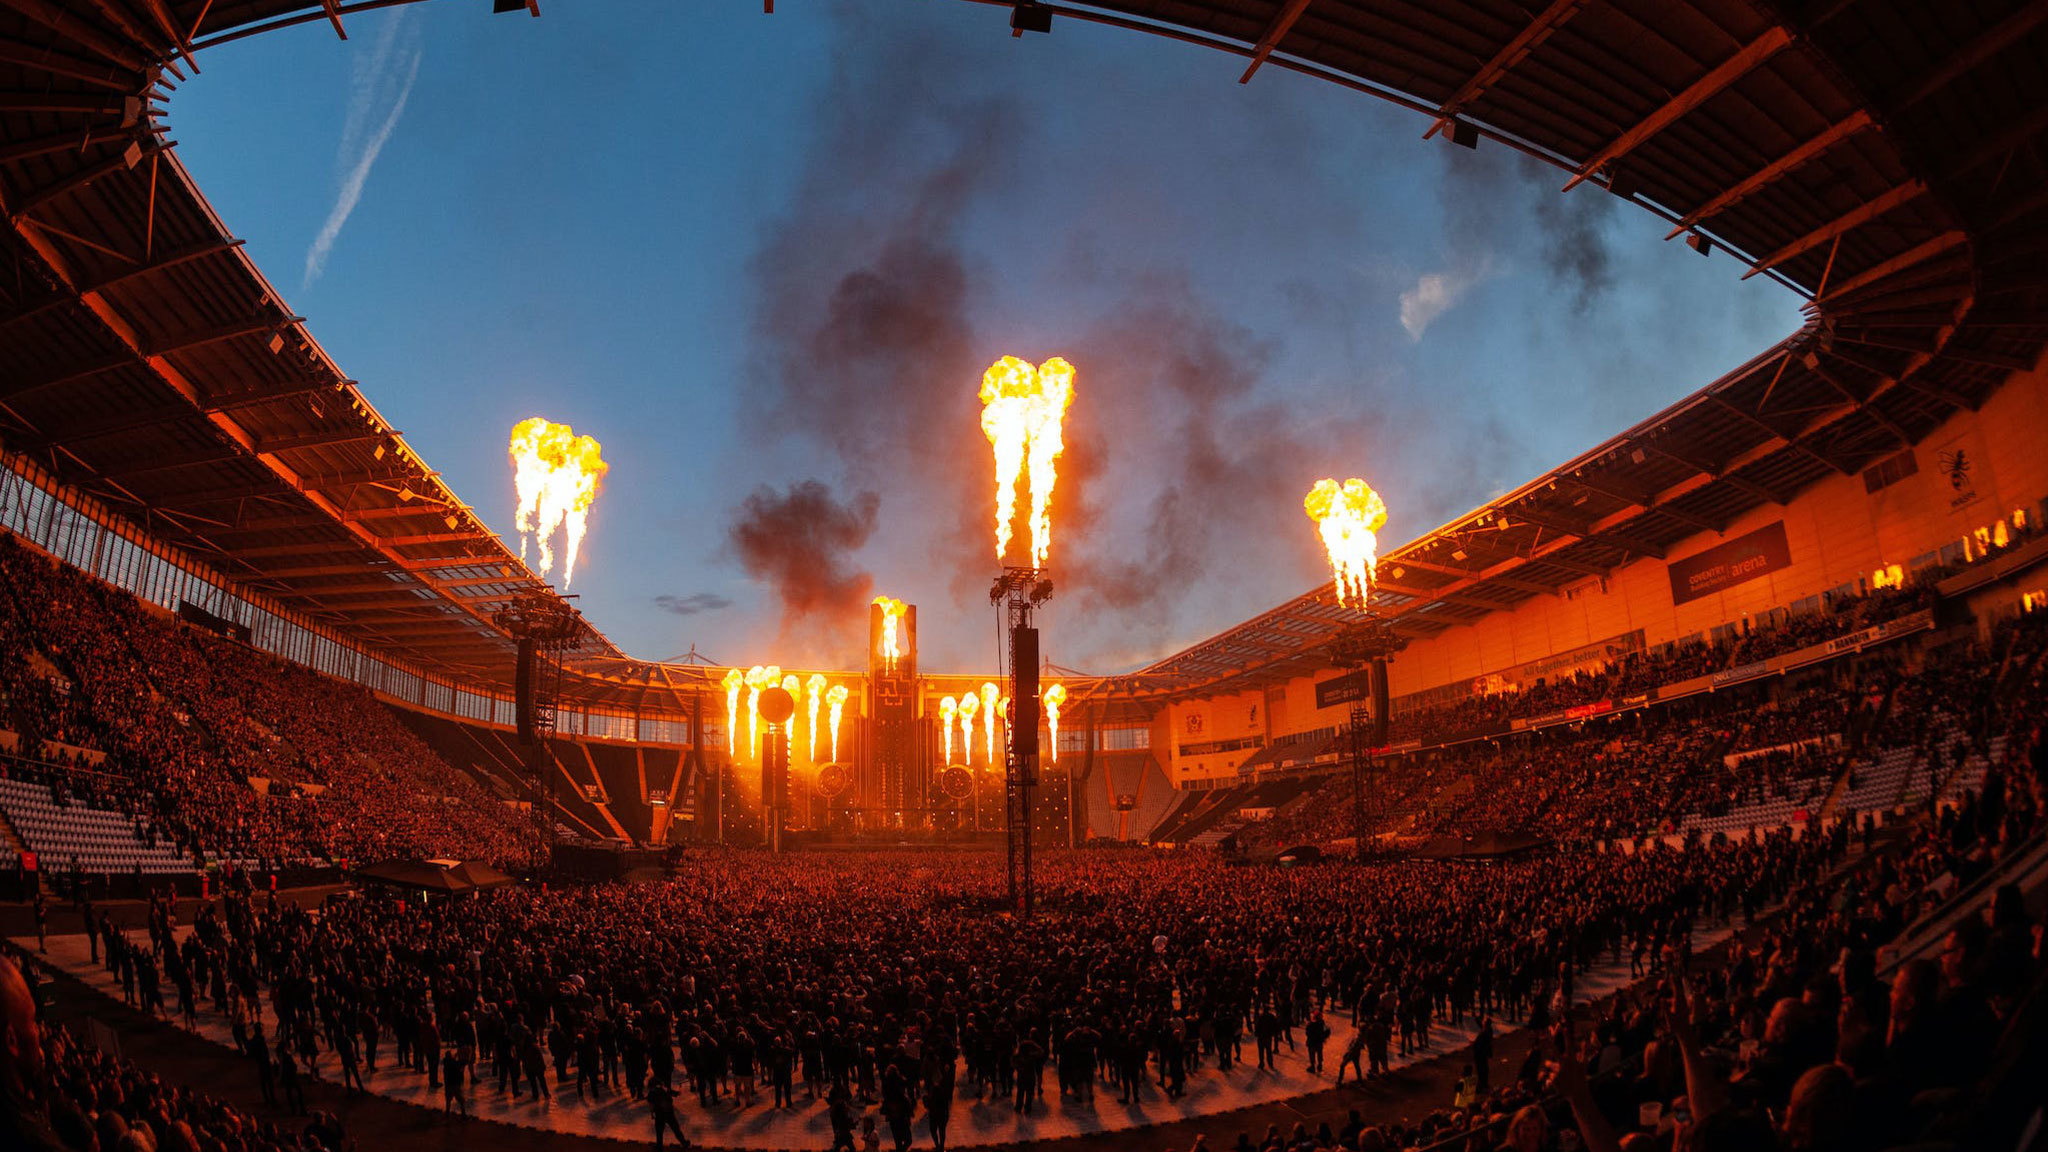 Rammstein in concert at the Stade de France: we were there, we tell you all  about it 